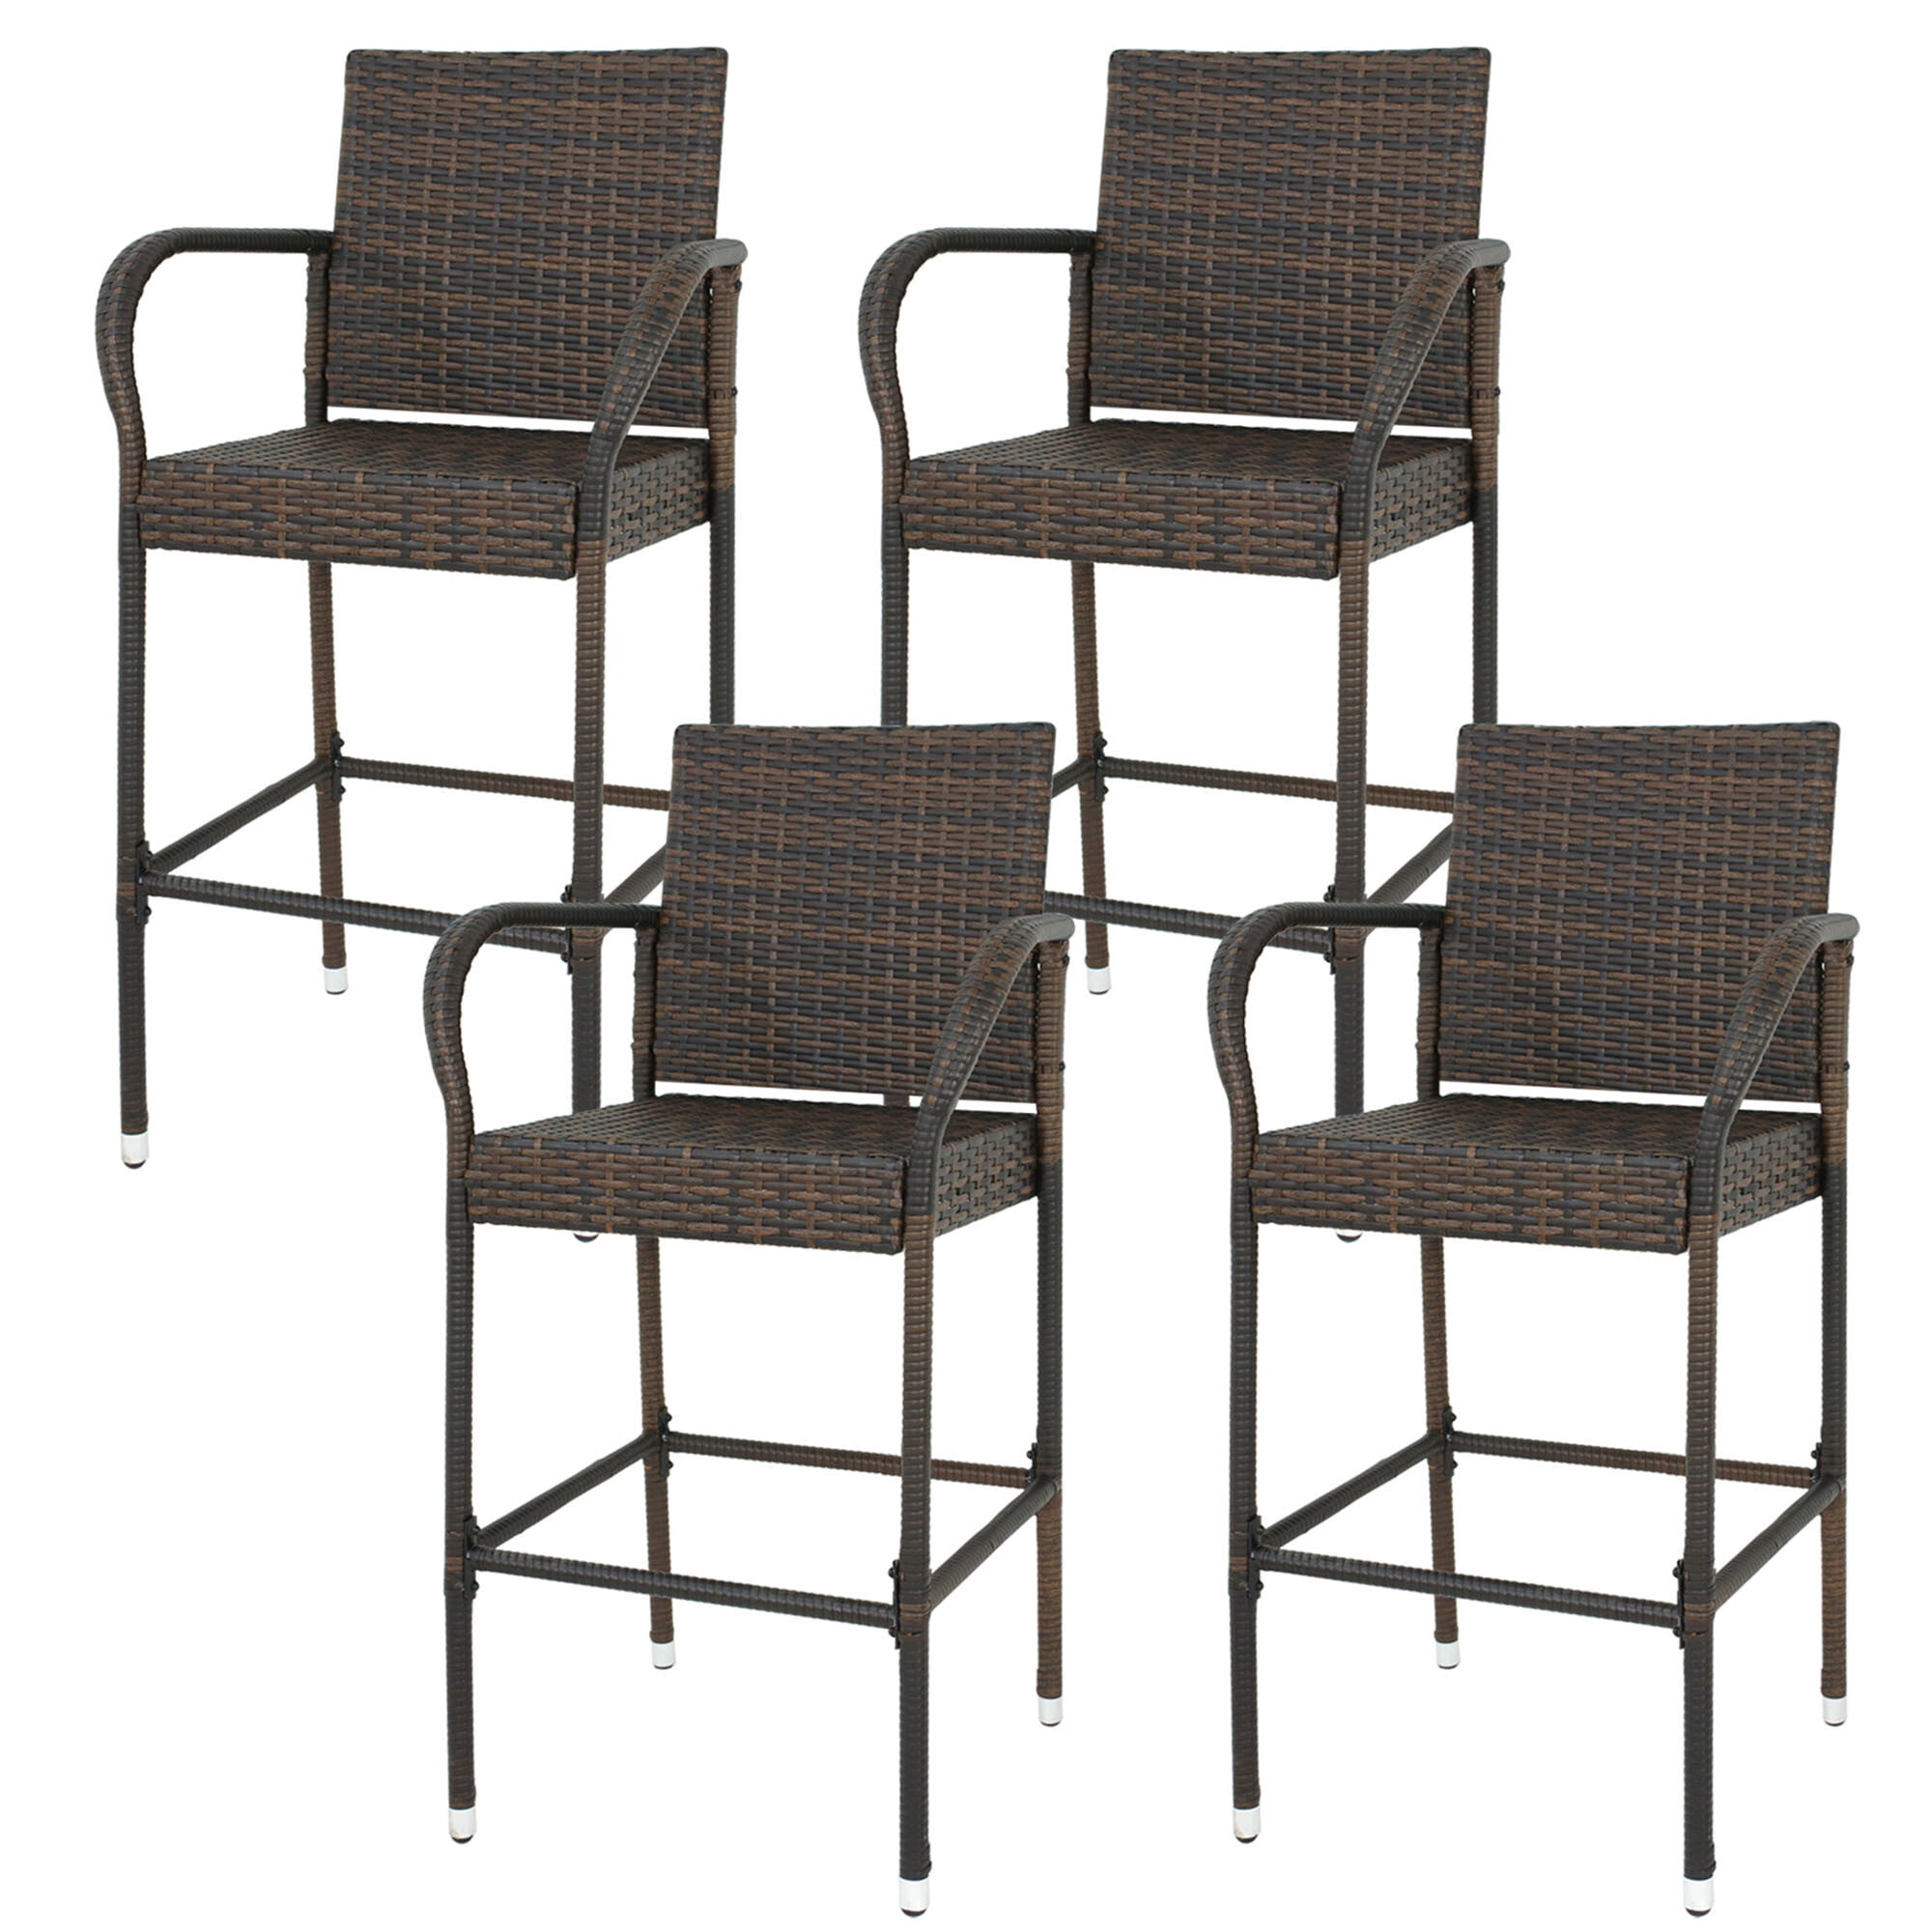 VIVOHOME 4Pcs Outdoor Wicker Barstool Patio Rattan Furniture with Cushions Black 